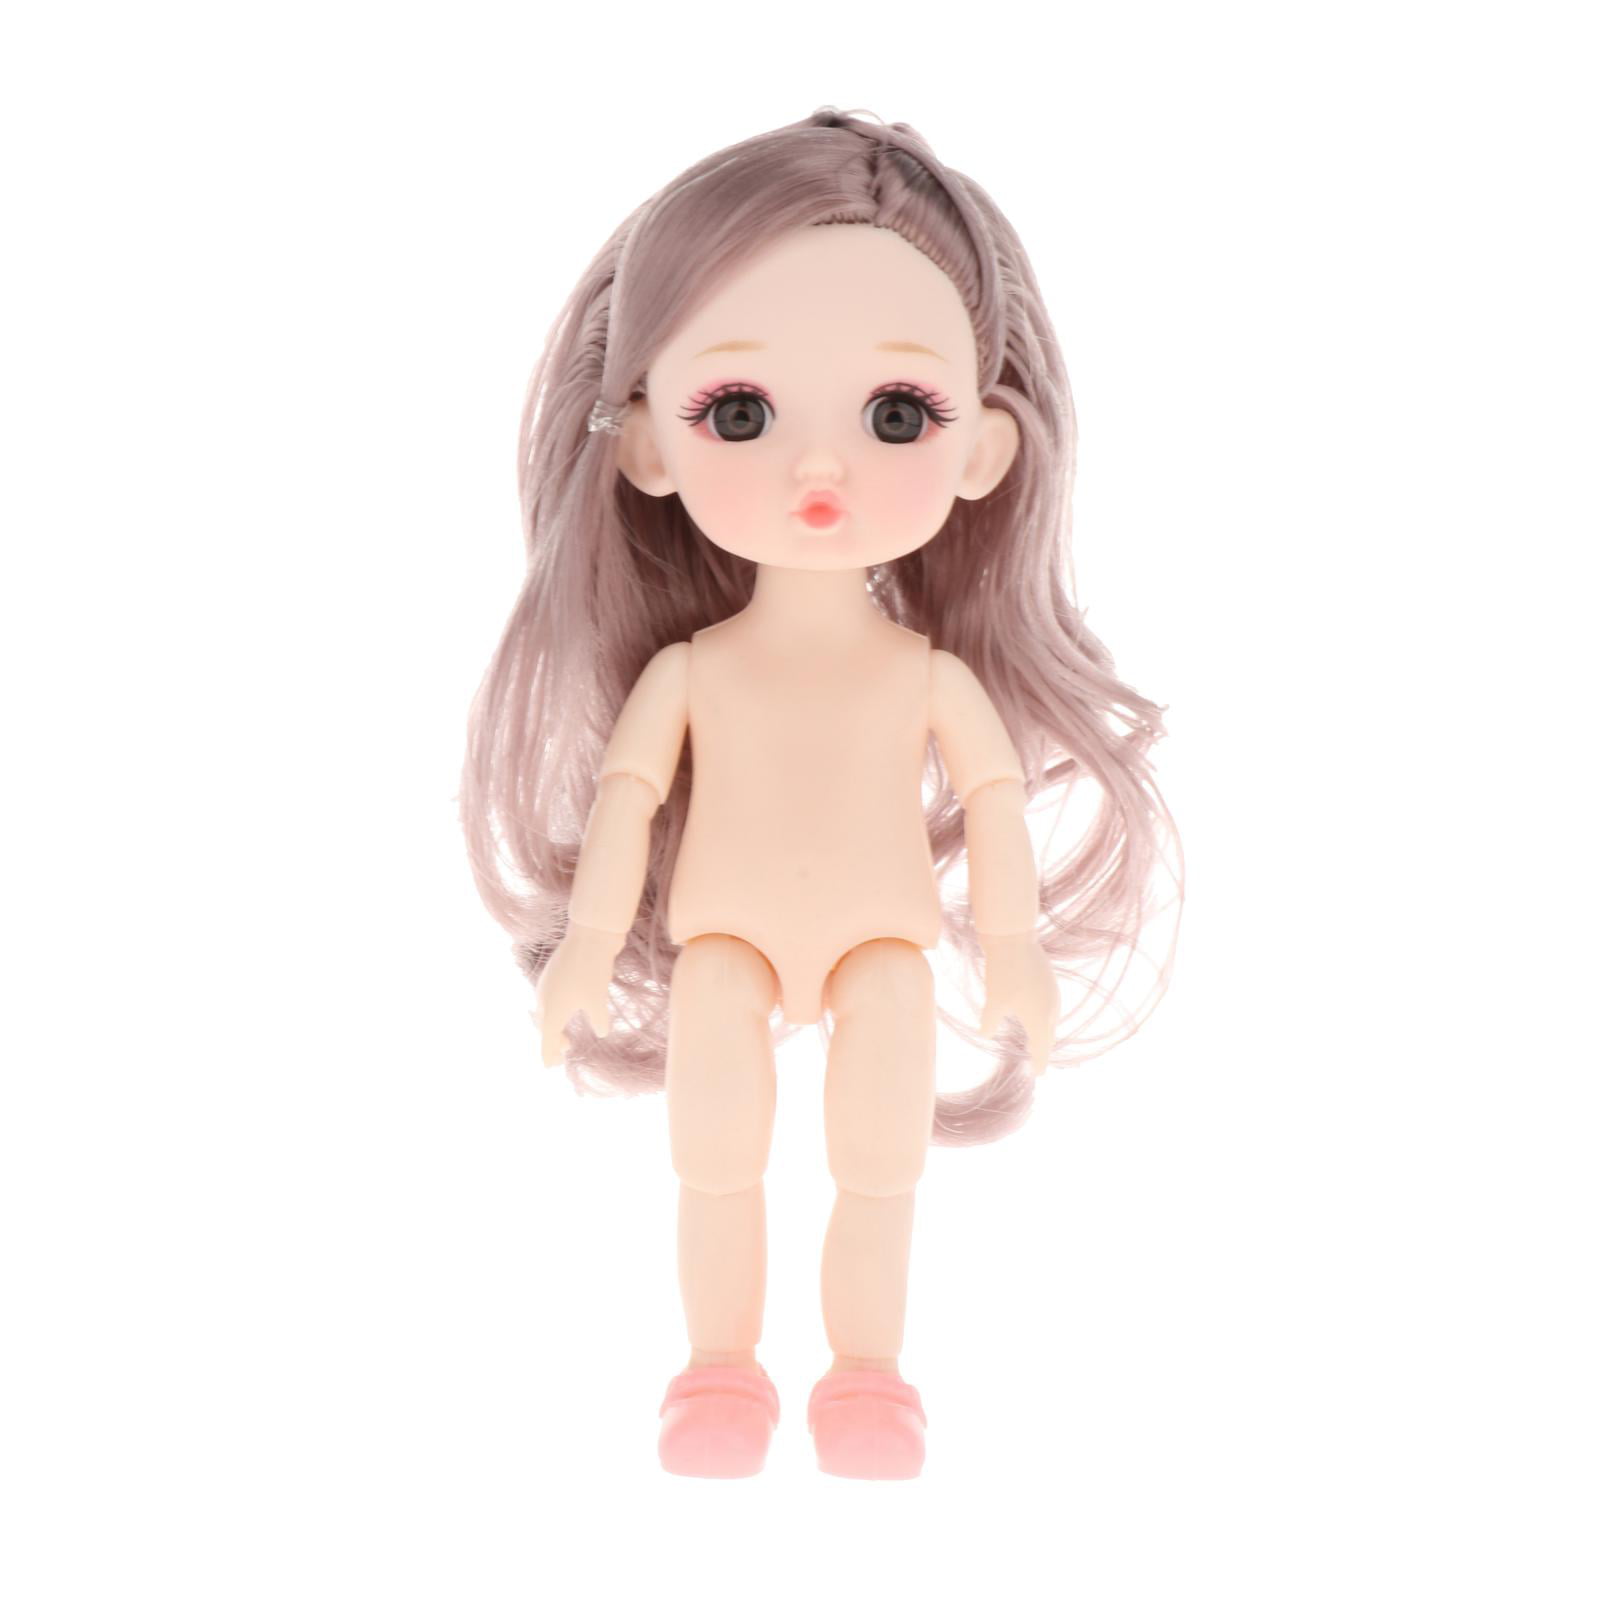 6inch 16CM BJD 13 Jointed Nude Blank Figure Doll Body Practice Makeup Accessory 